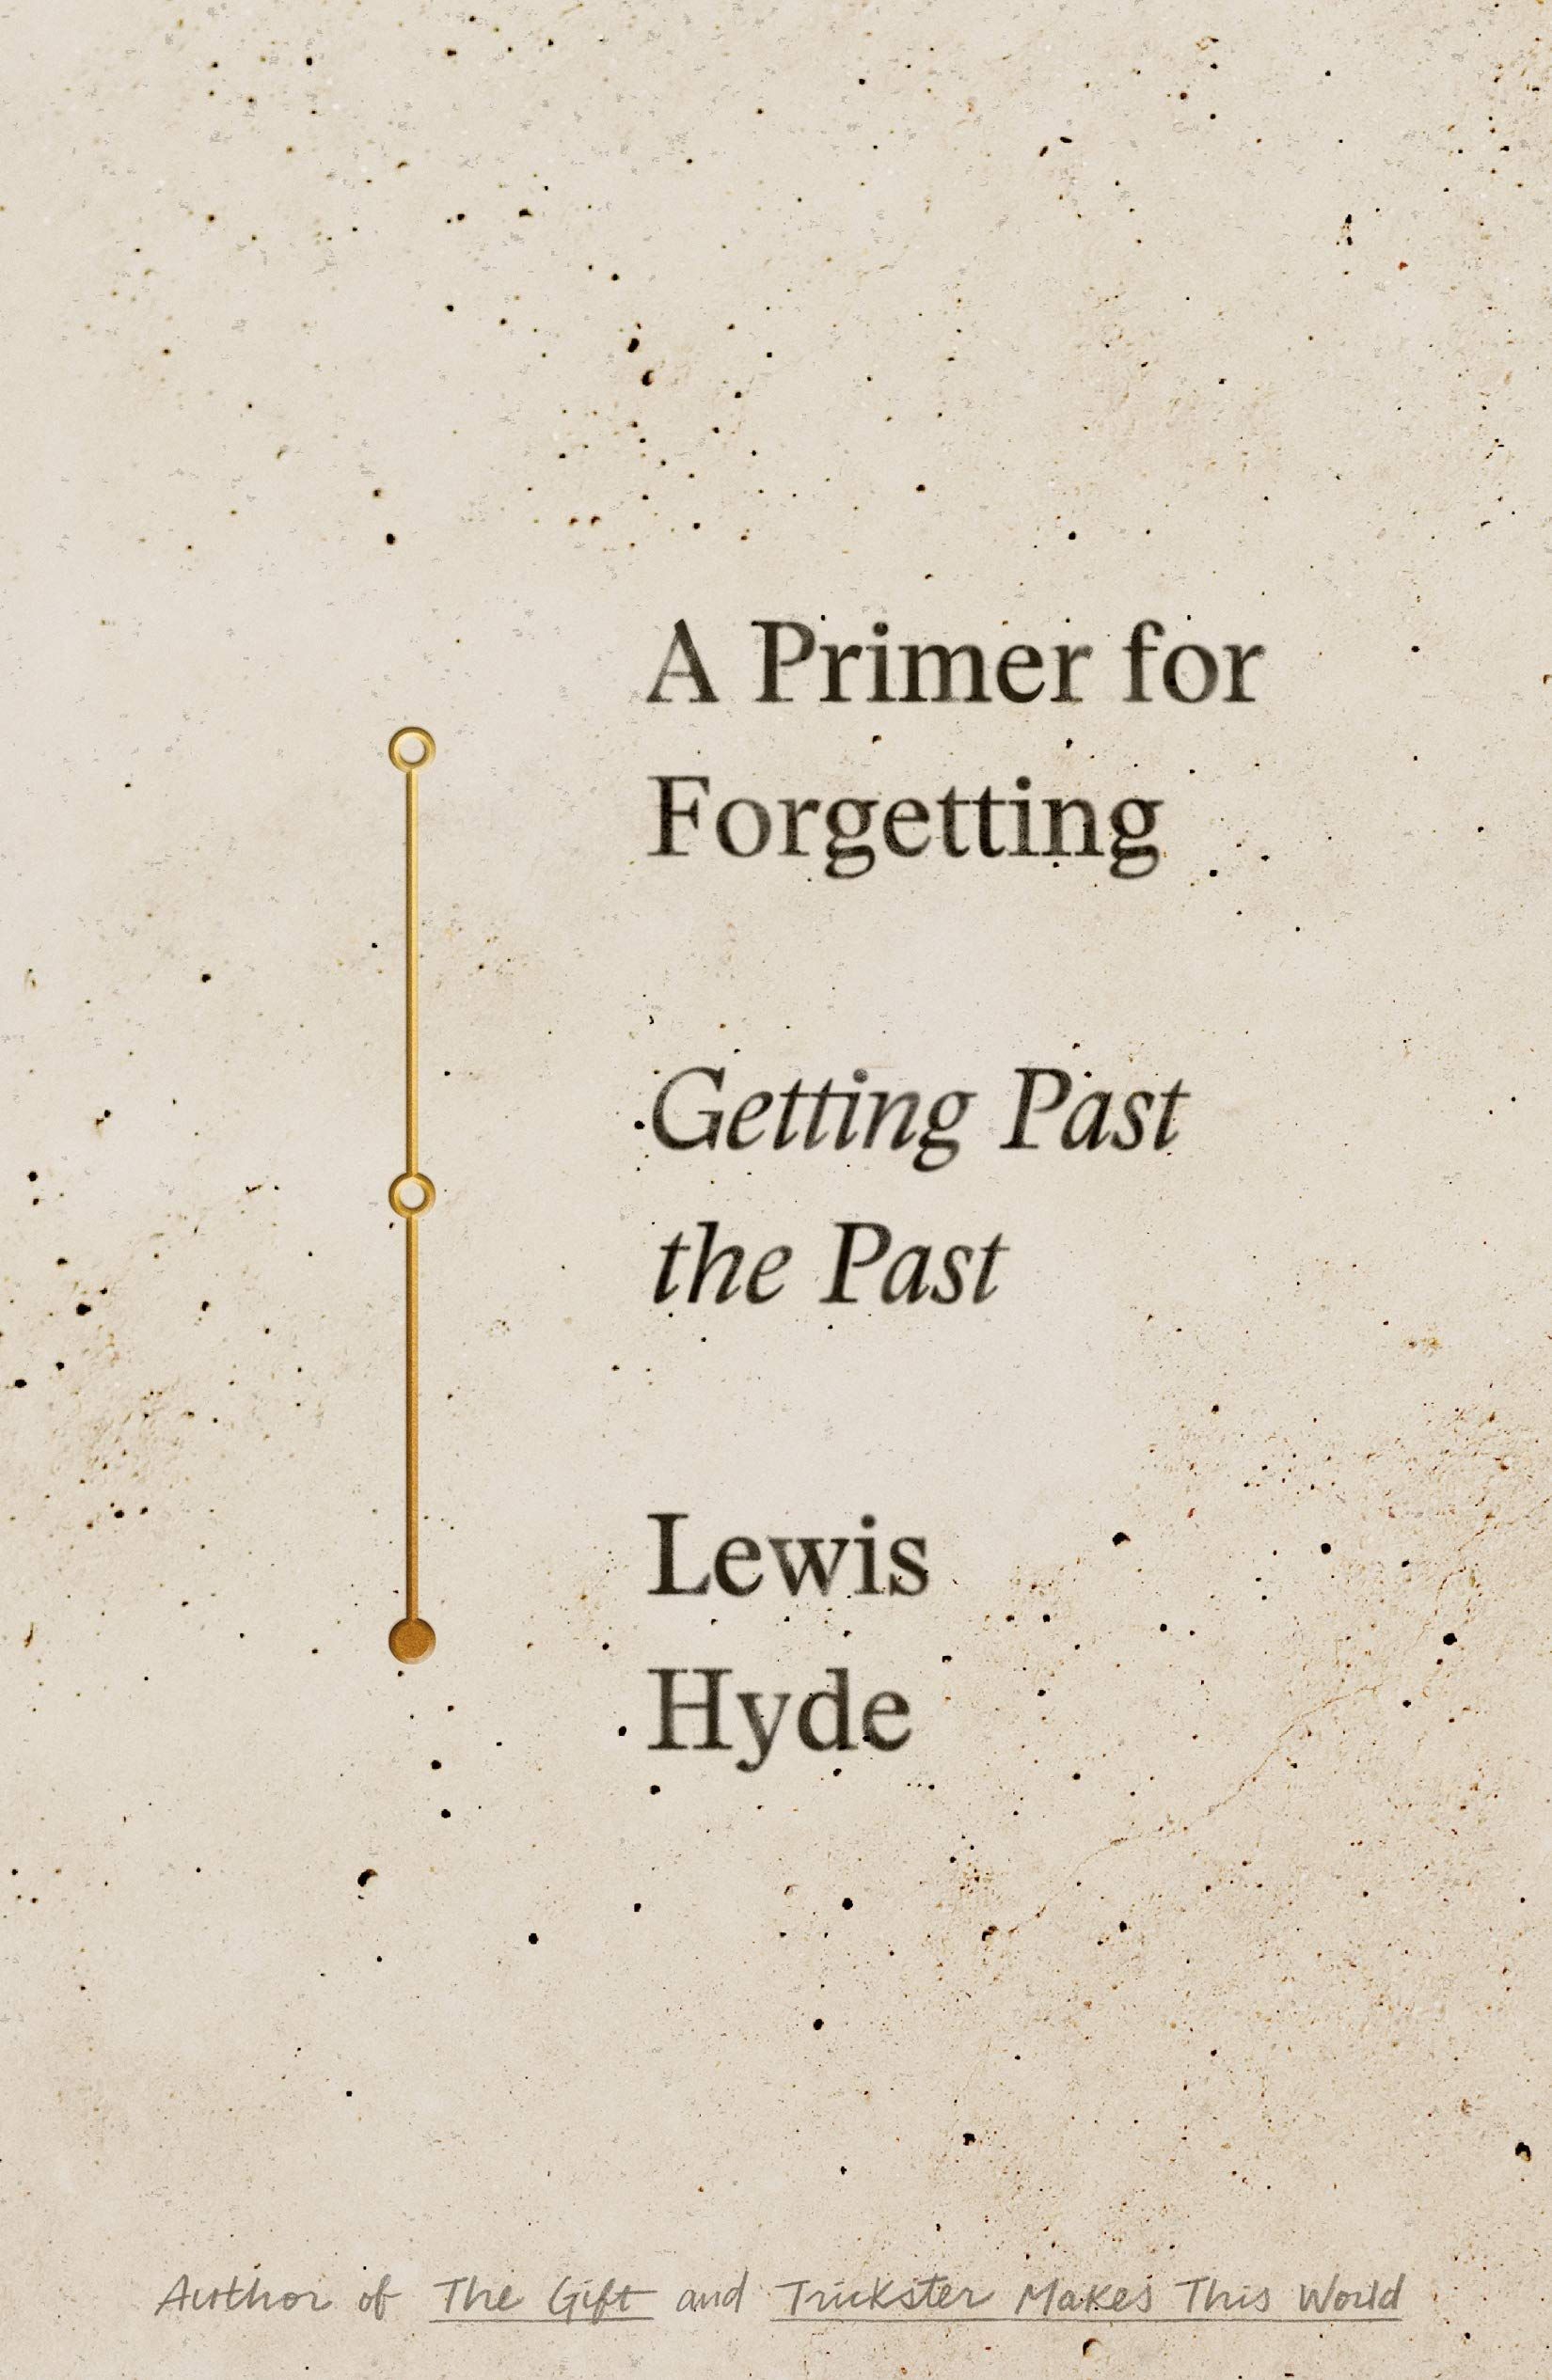 How to Forget: On Lewis Hyde’s “A Primer for Forgetting: Getting Past the Past”